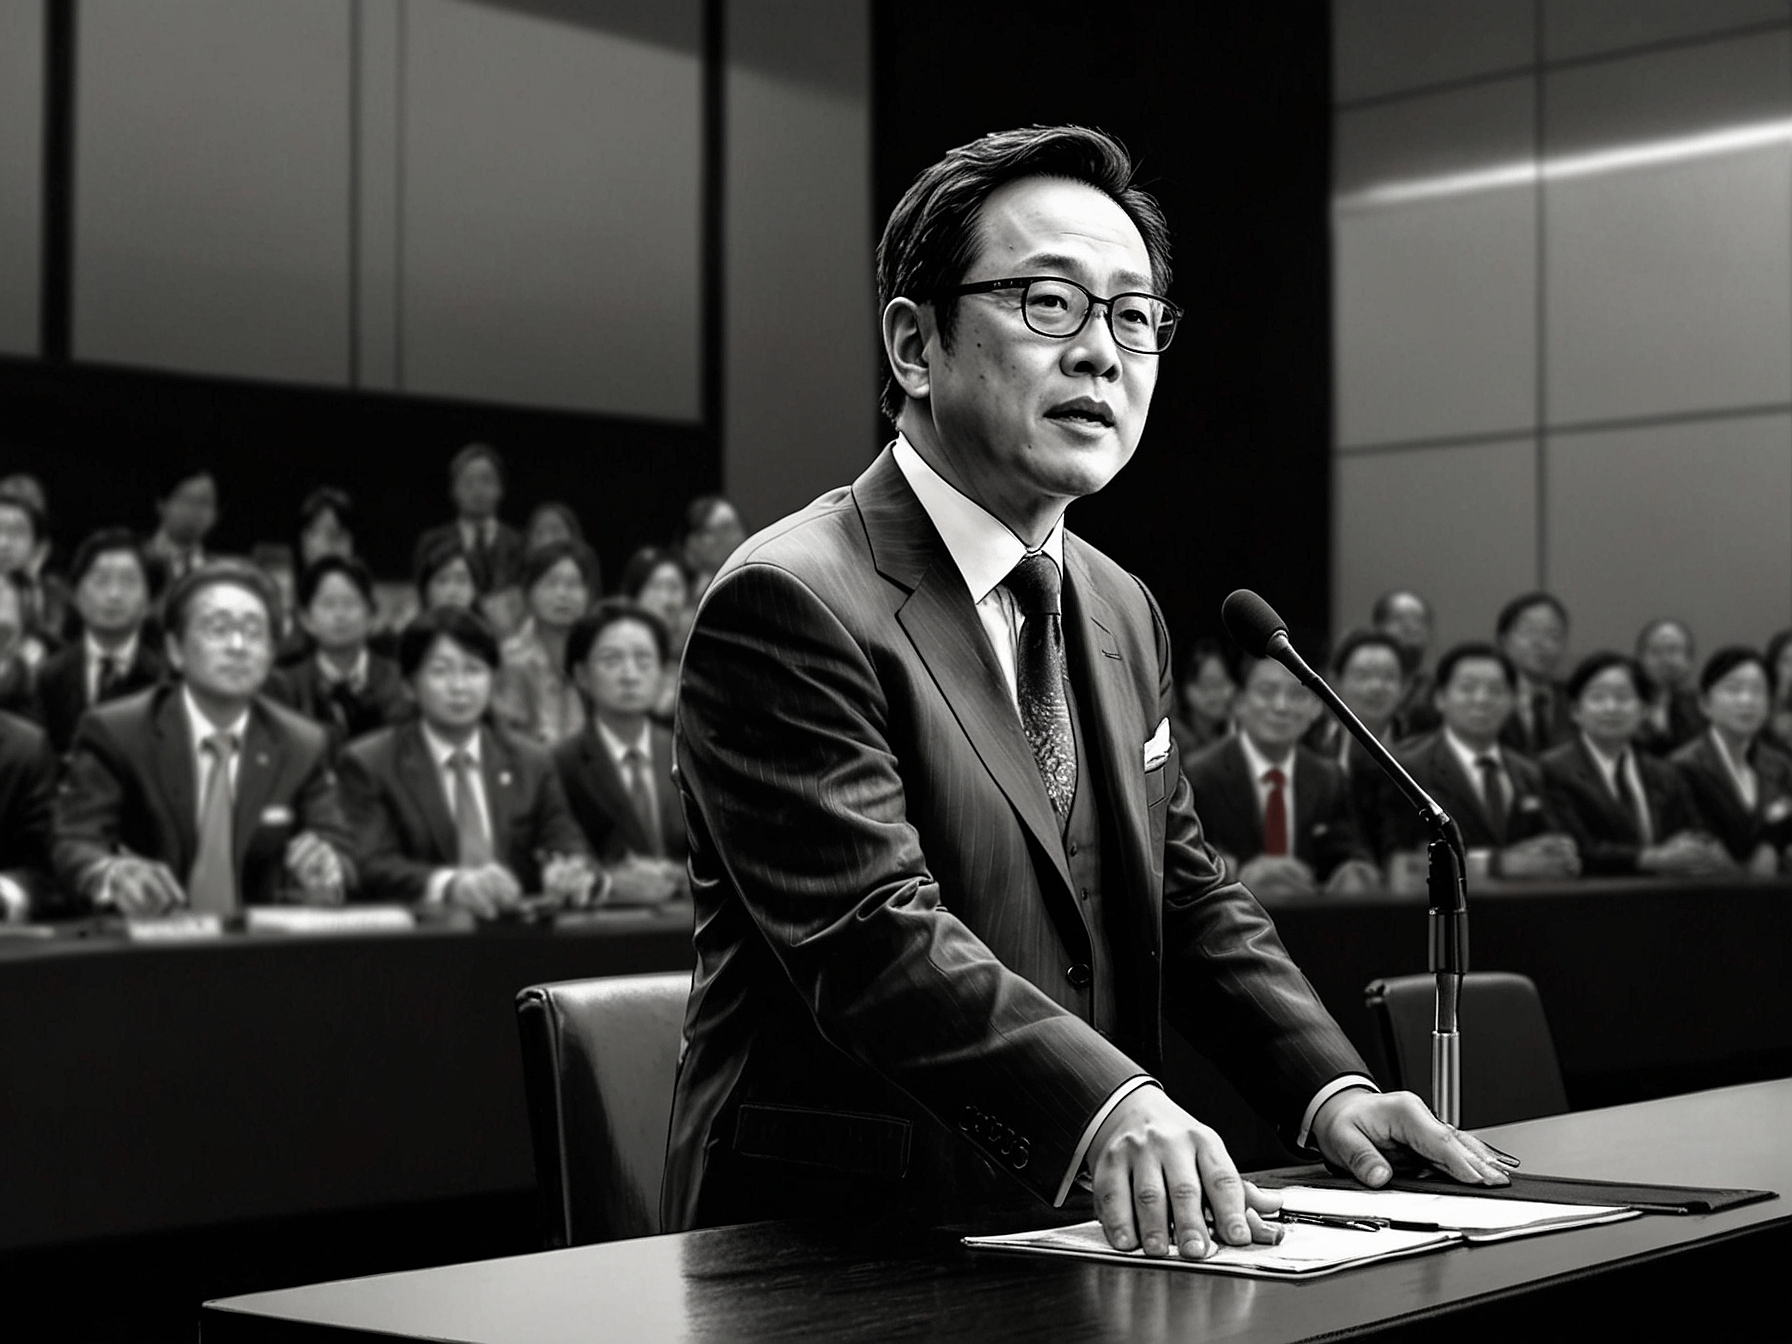 Akio Toyoda addressing shareholders at the general meeting in Tokyo, highlighting his strategic vision and commitment to leading Toyota through the evolving automotive industry.